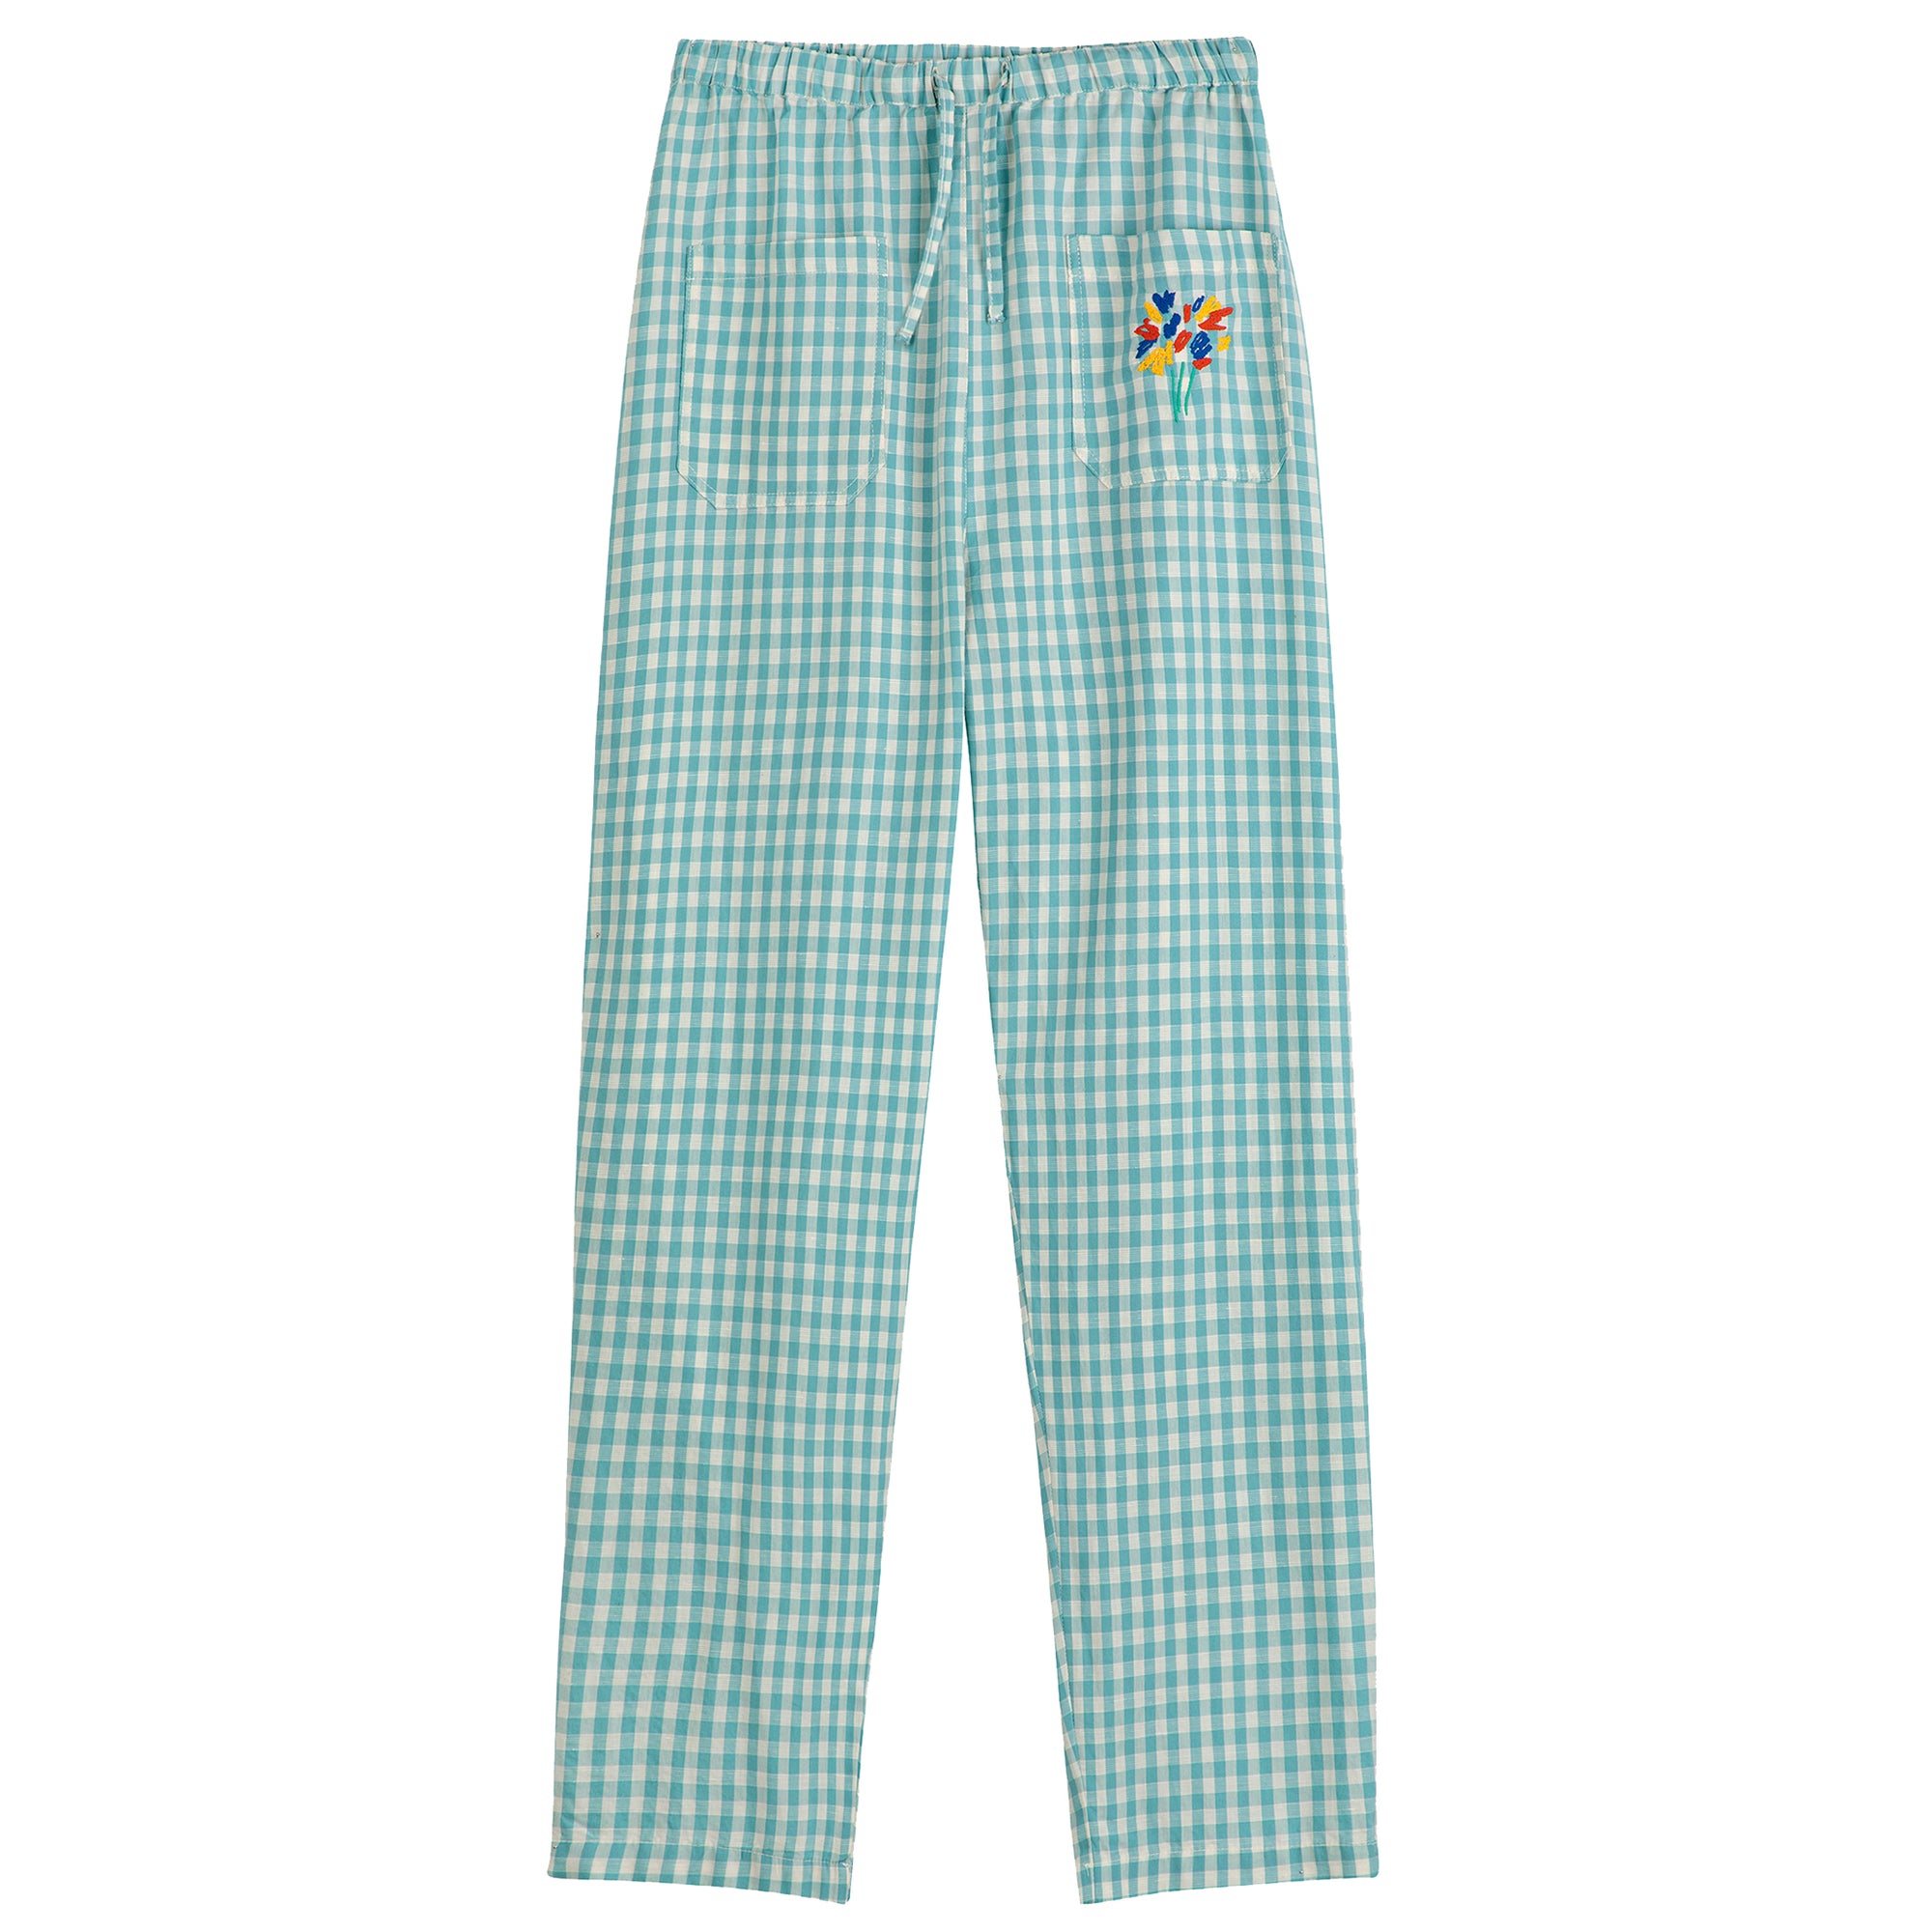 Bobo Choses Woman Loose Trousers Turquoise Blue Gingham